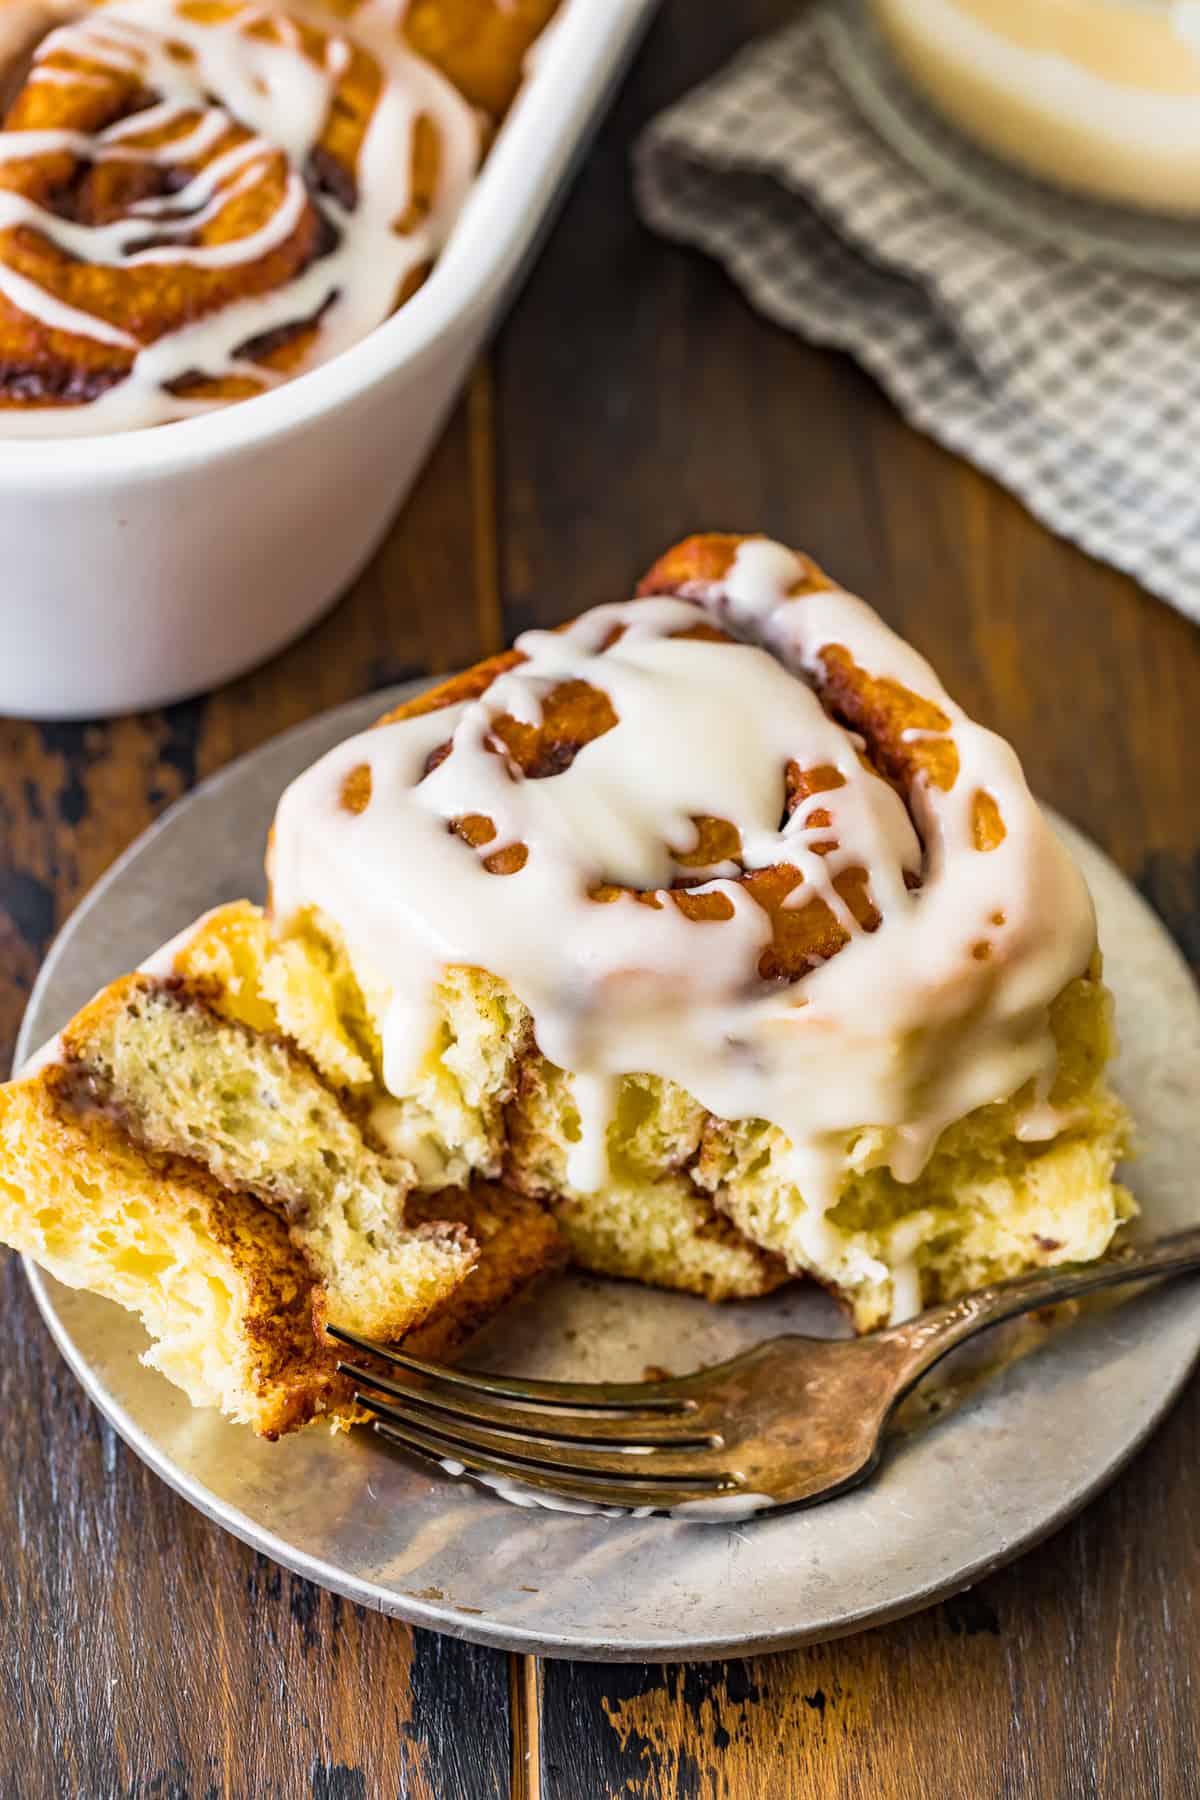 A cinnamon roll served on a plate with a fork